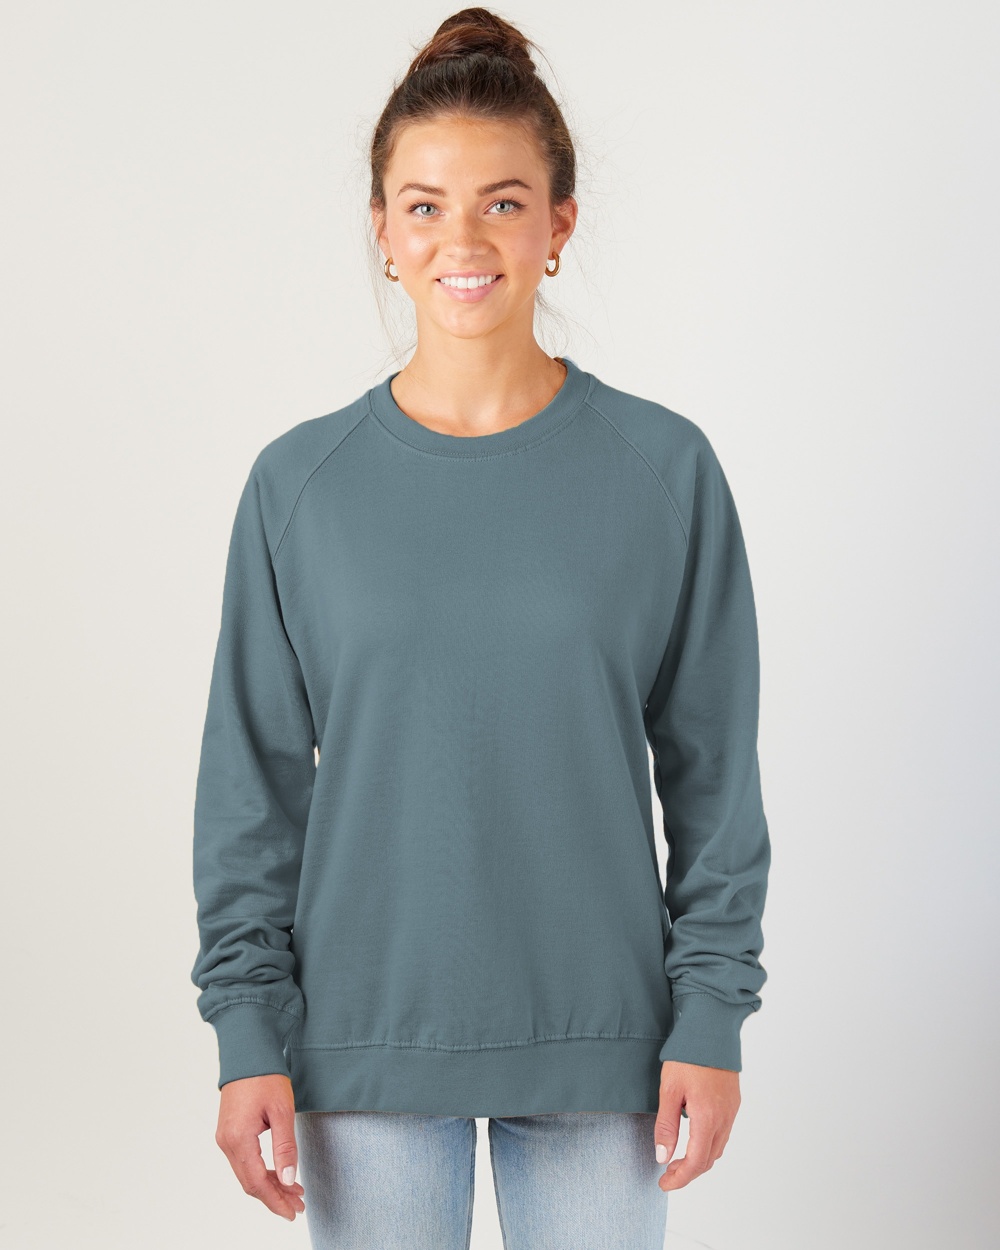 Enza® 32579 Ladies PFC Pullover Crew - Wholesale Apparel and Supplies